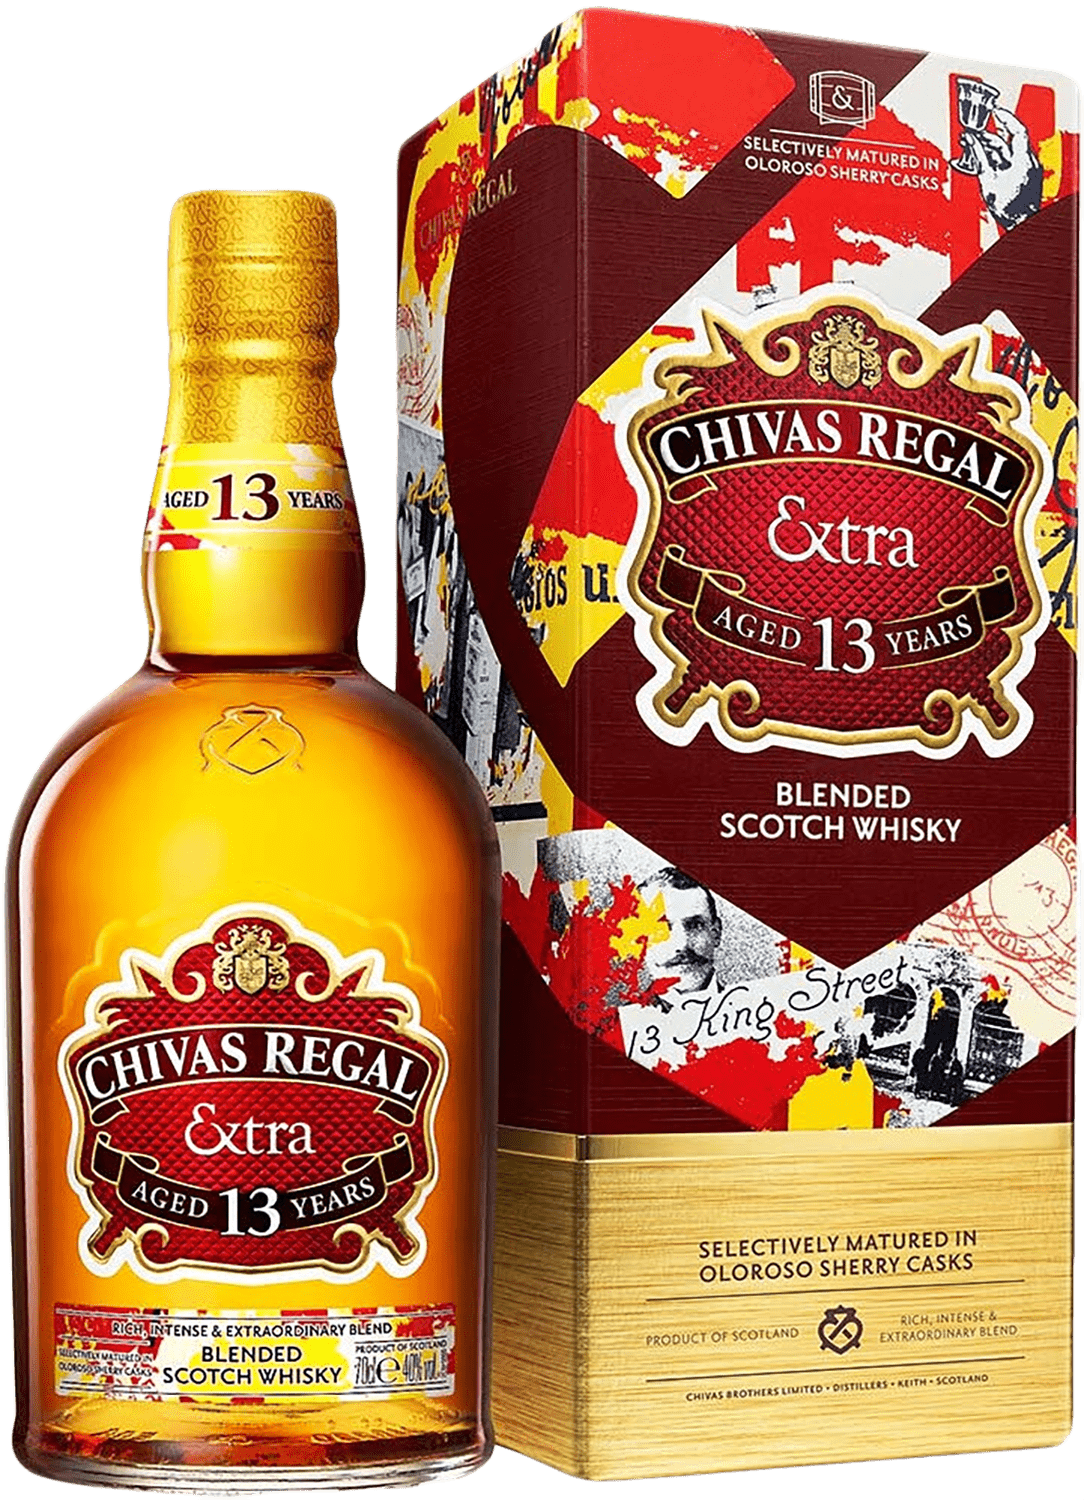 Chivas Regal Extra Oloroso Sherry Cask blended scotch whisky 13 y.o. (gift box) grant s sherry cask finish blended scotch whisky